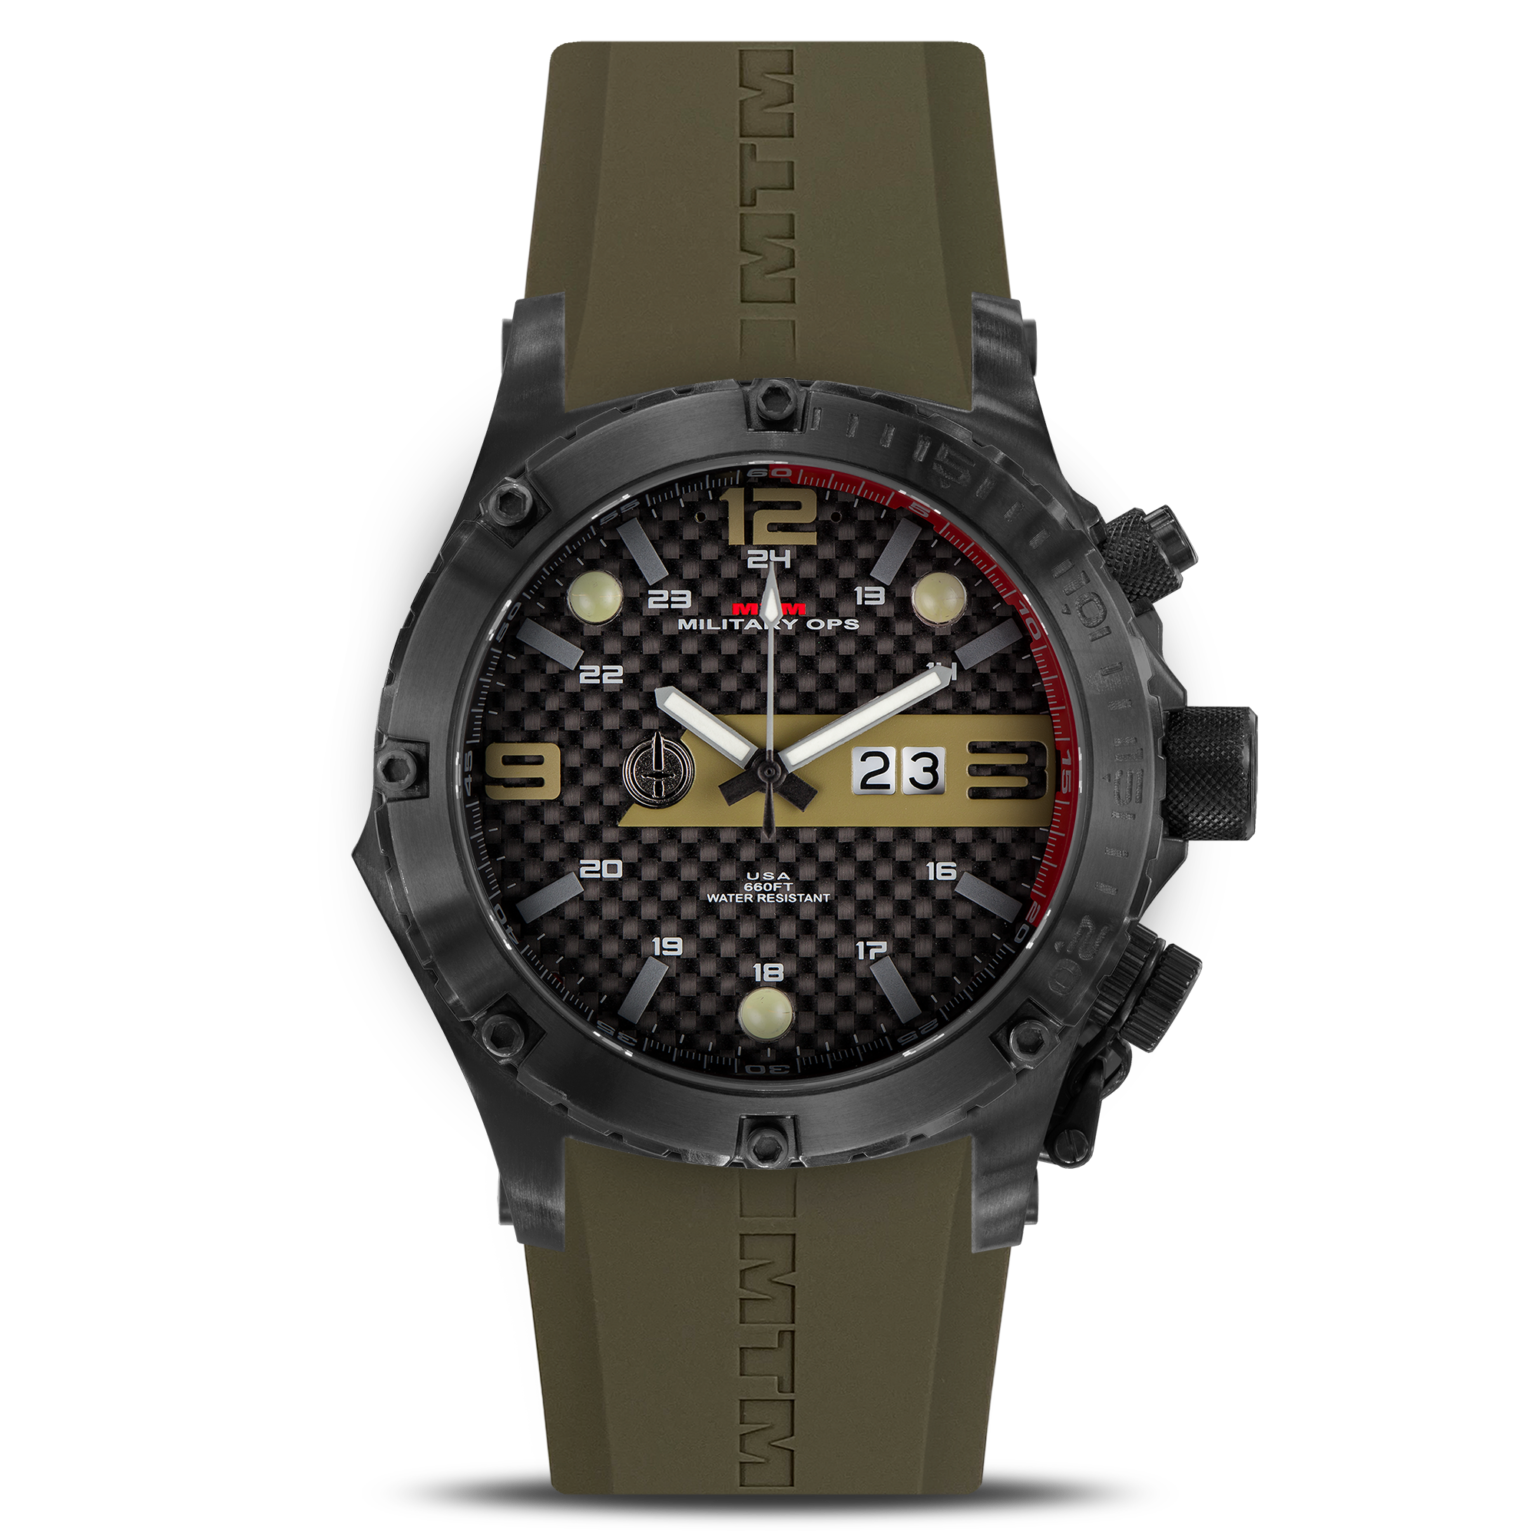 Vulture | Titanium Case Tactical Military Watch | MTM Special Ops